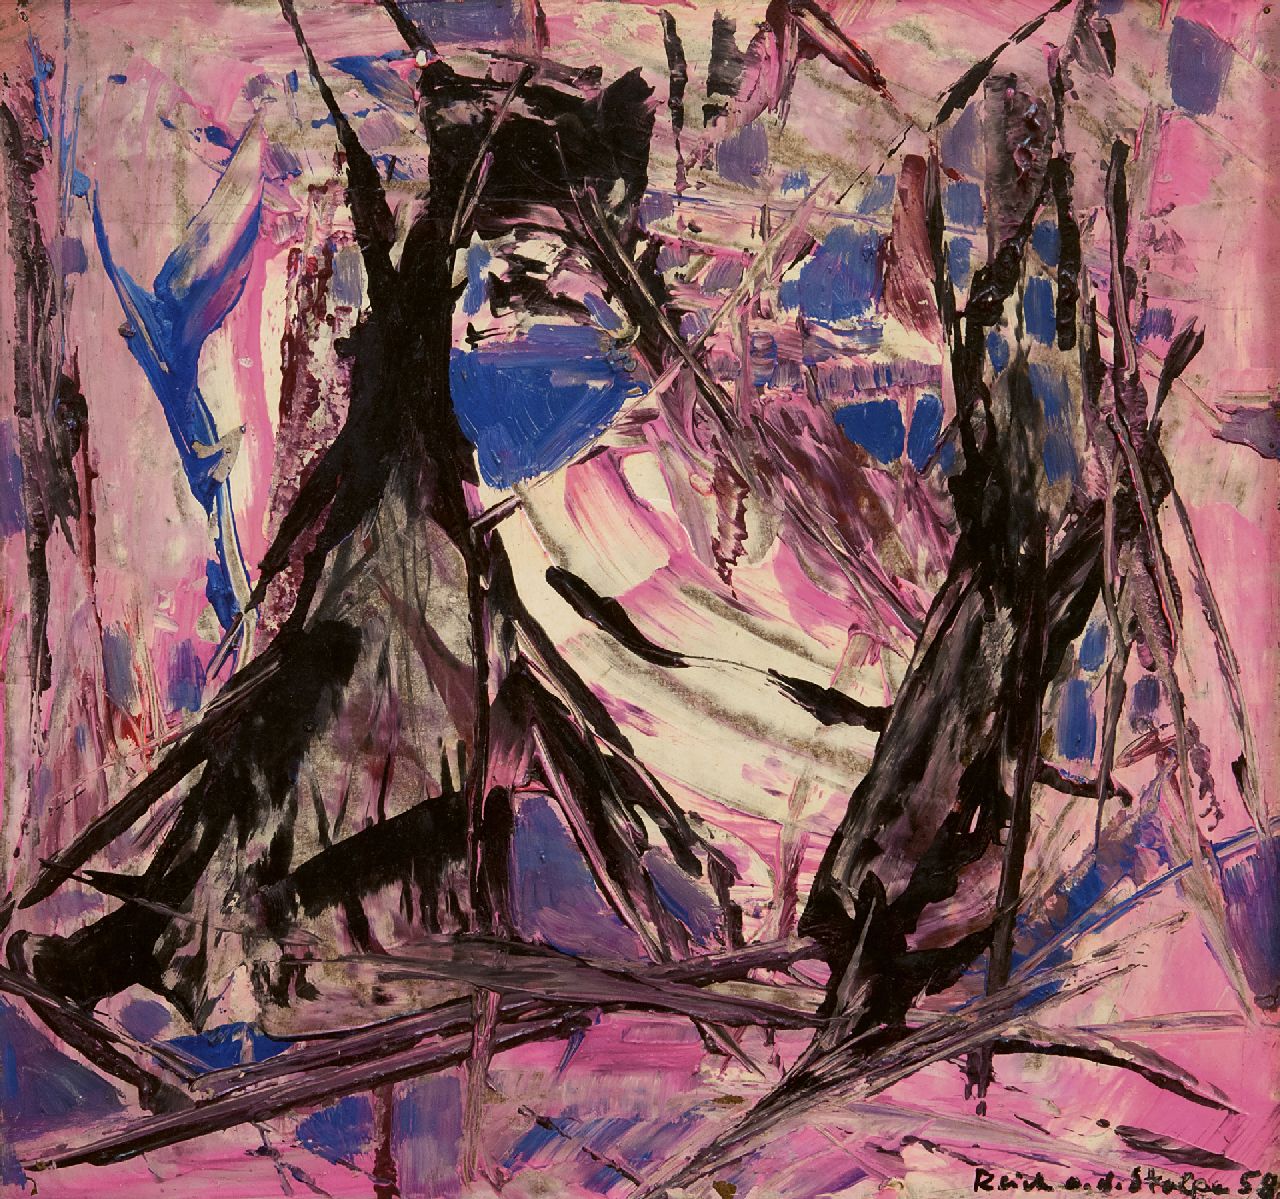 Reich an der Stolpe S.  | Siegfried Reich an der Stolpe | Paintings offered for sale | Violet room, oil on fiberboard 29.9 x 32.0 cm, signed l.r. and dated '58